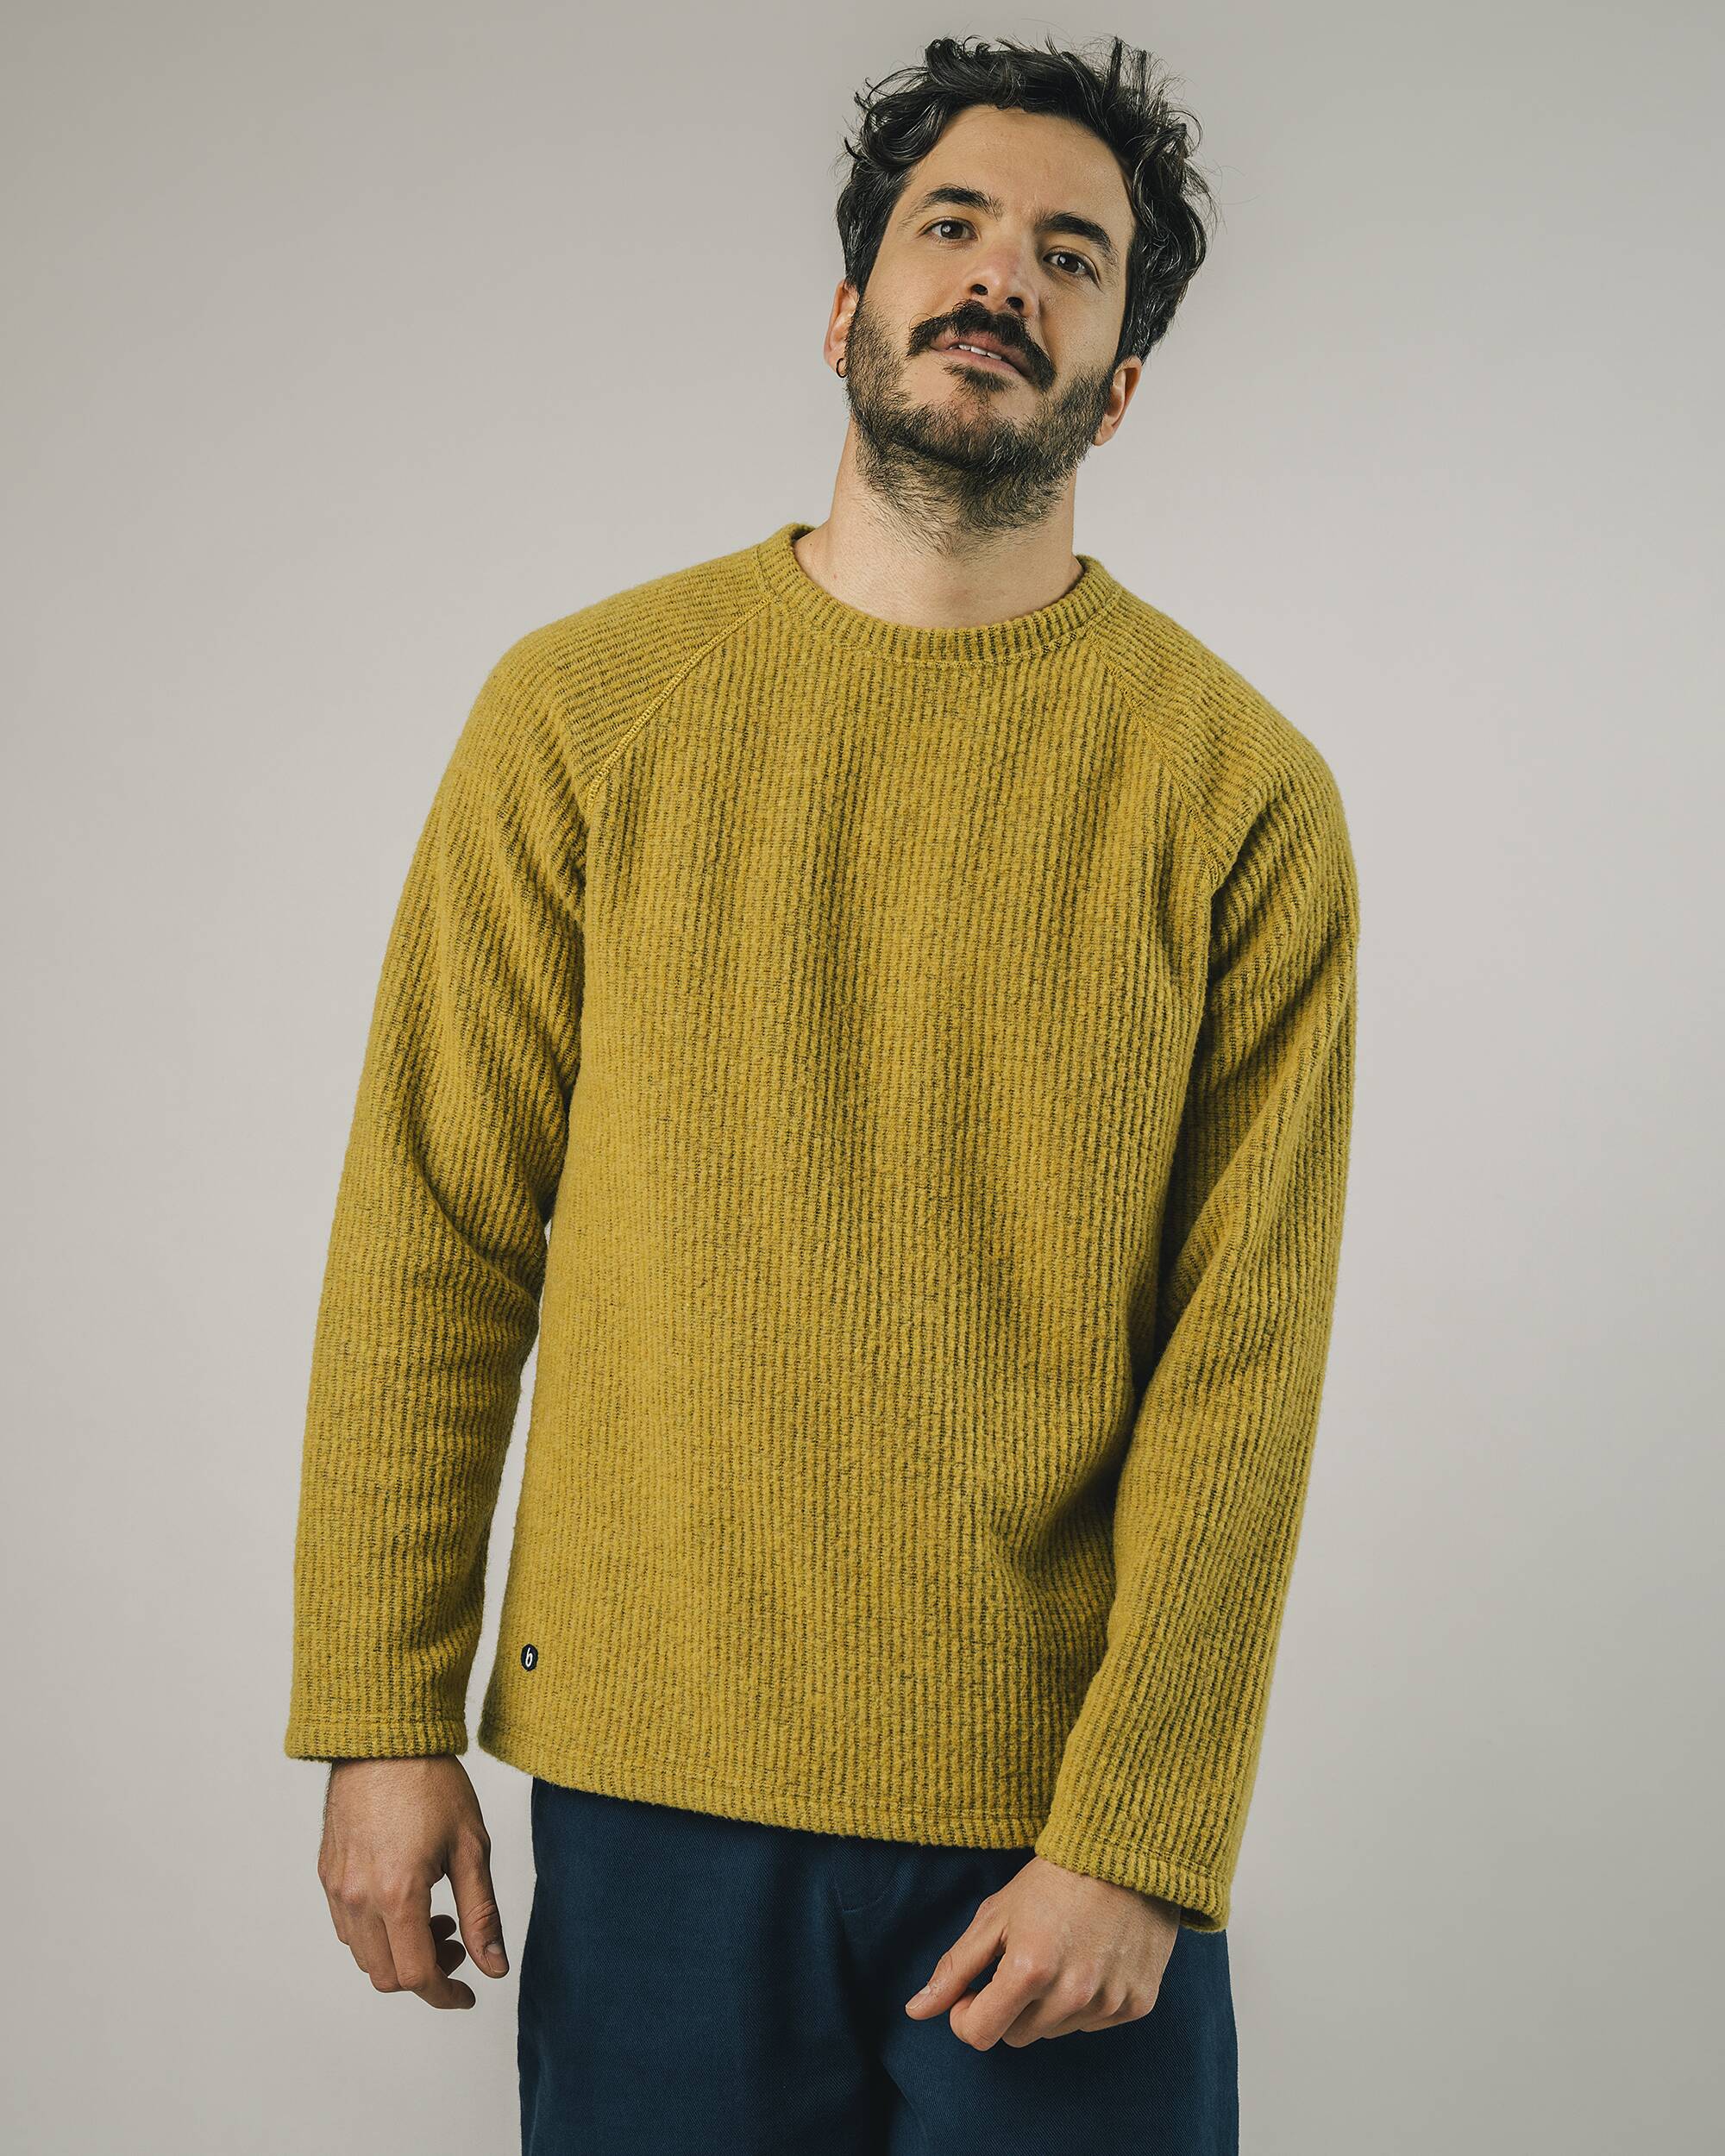 Oversized sweater in mustard - yellow made from recycled materials from Brava Fabrics